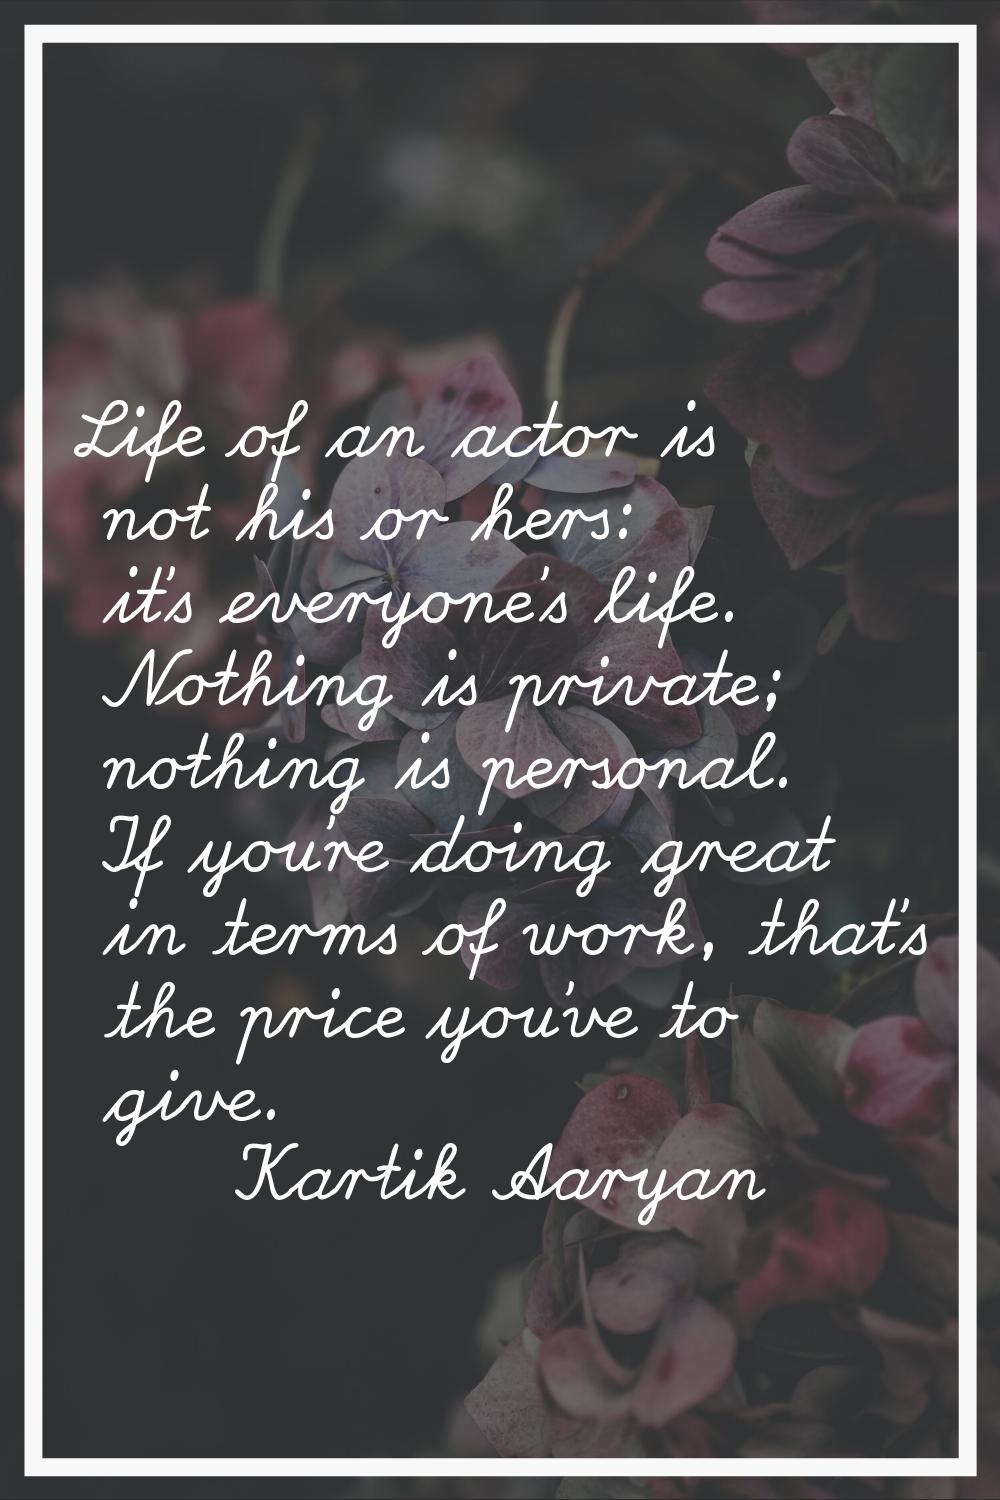 Life of an actor is not his or hers: it's everyone's life. Nothing is private; nothing is personal.